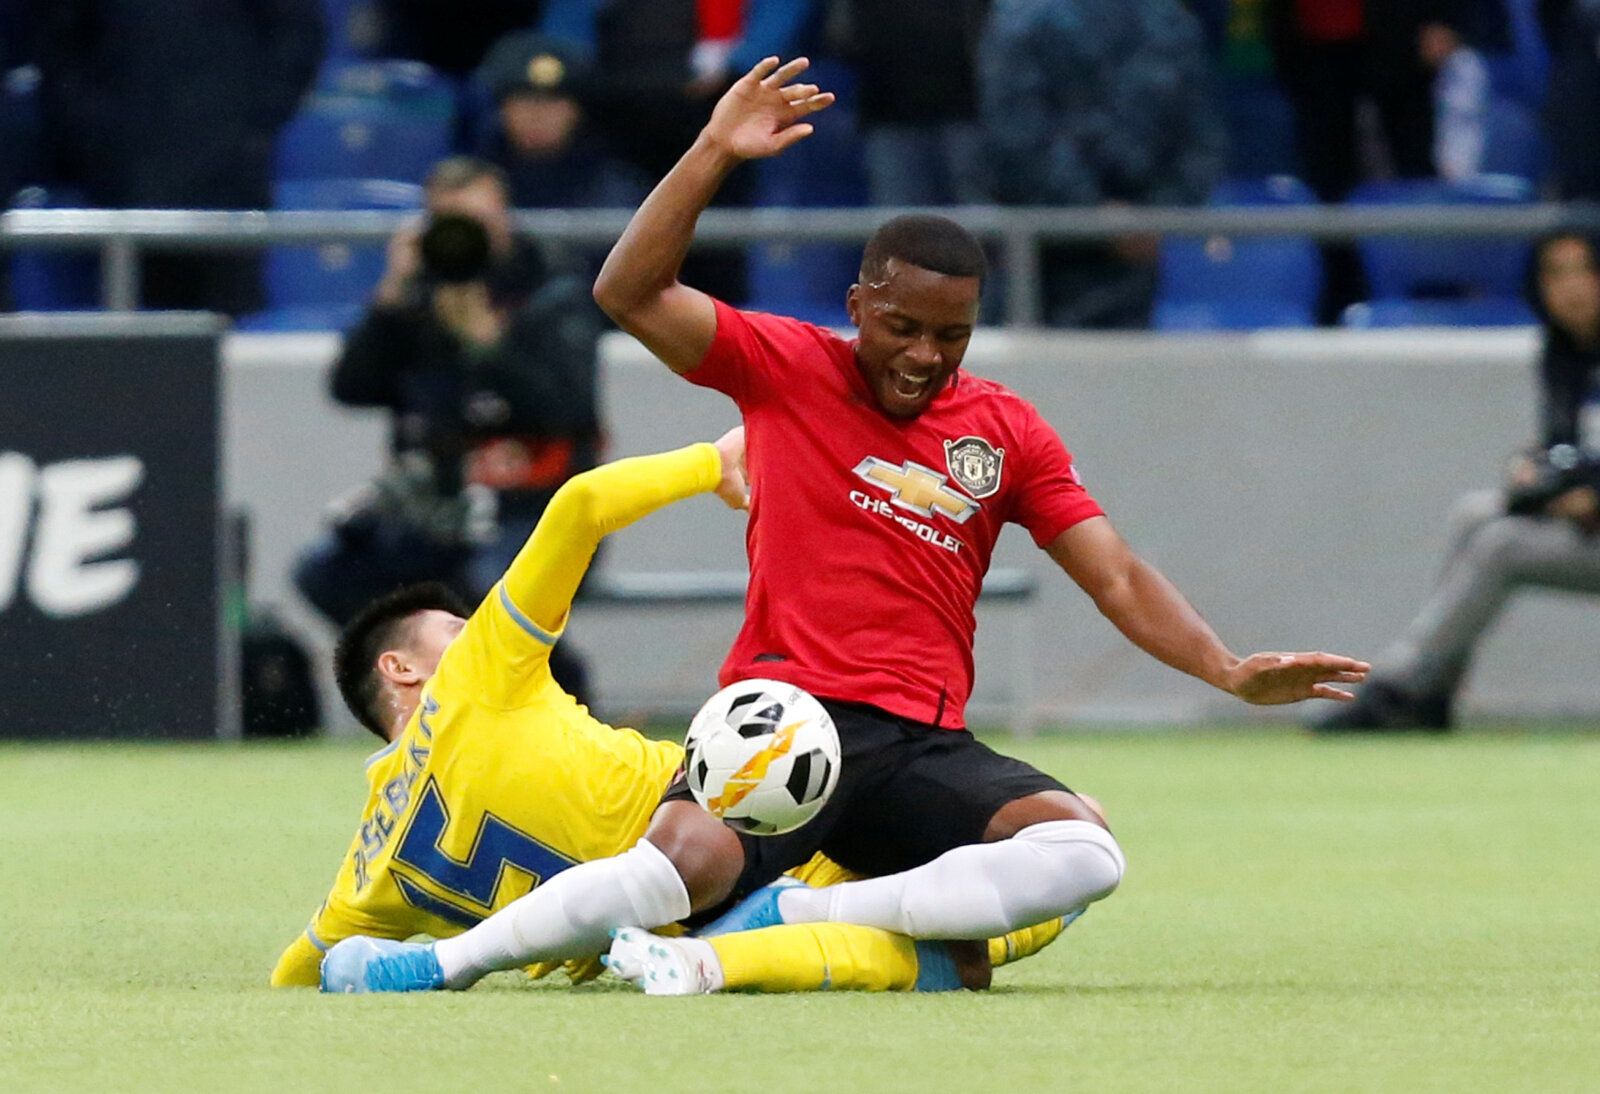 Soccer Football - Europa League - Group L - Astana v Manchester United - Astana Arena, Nur-Sultan, Kazakhstan - November 28, 2019  Manchester United's Ethan Laird in action with Astana's Abzal Beysebekov   REUTERS/Pavel Mikheyev